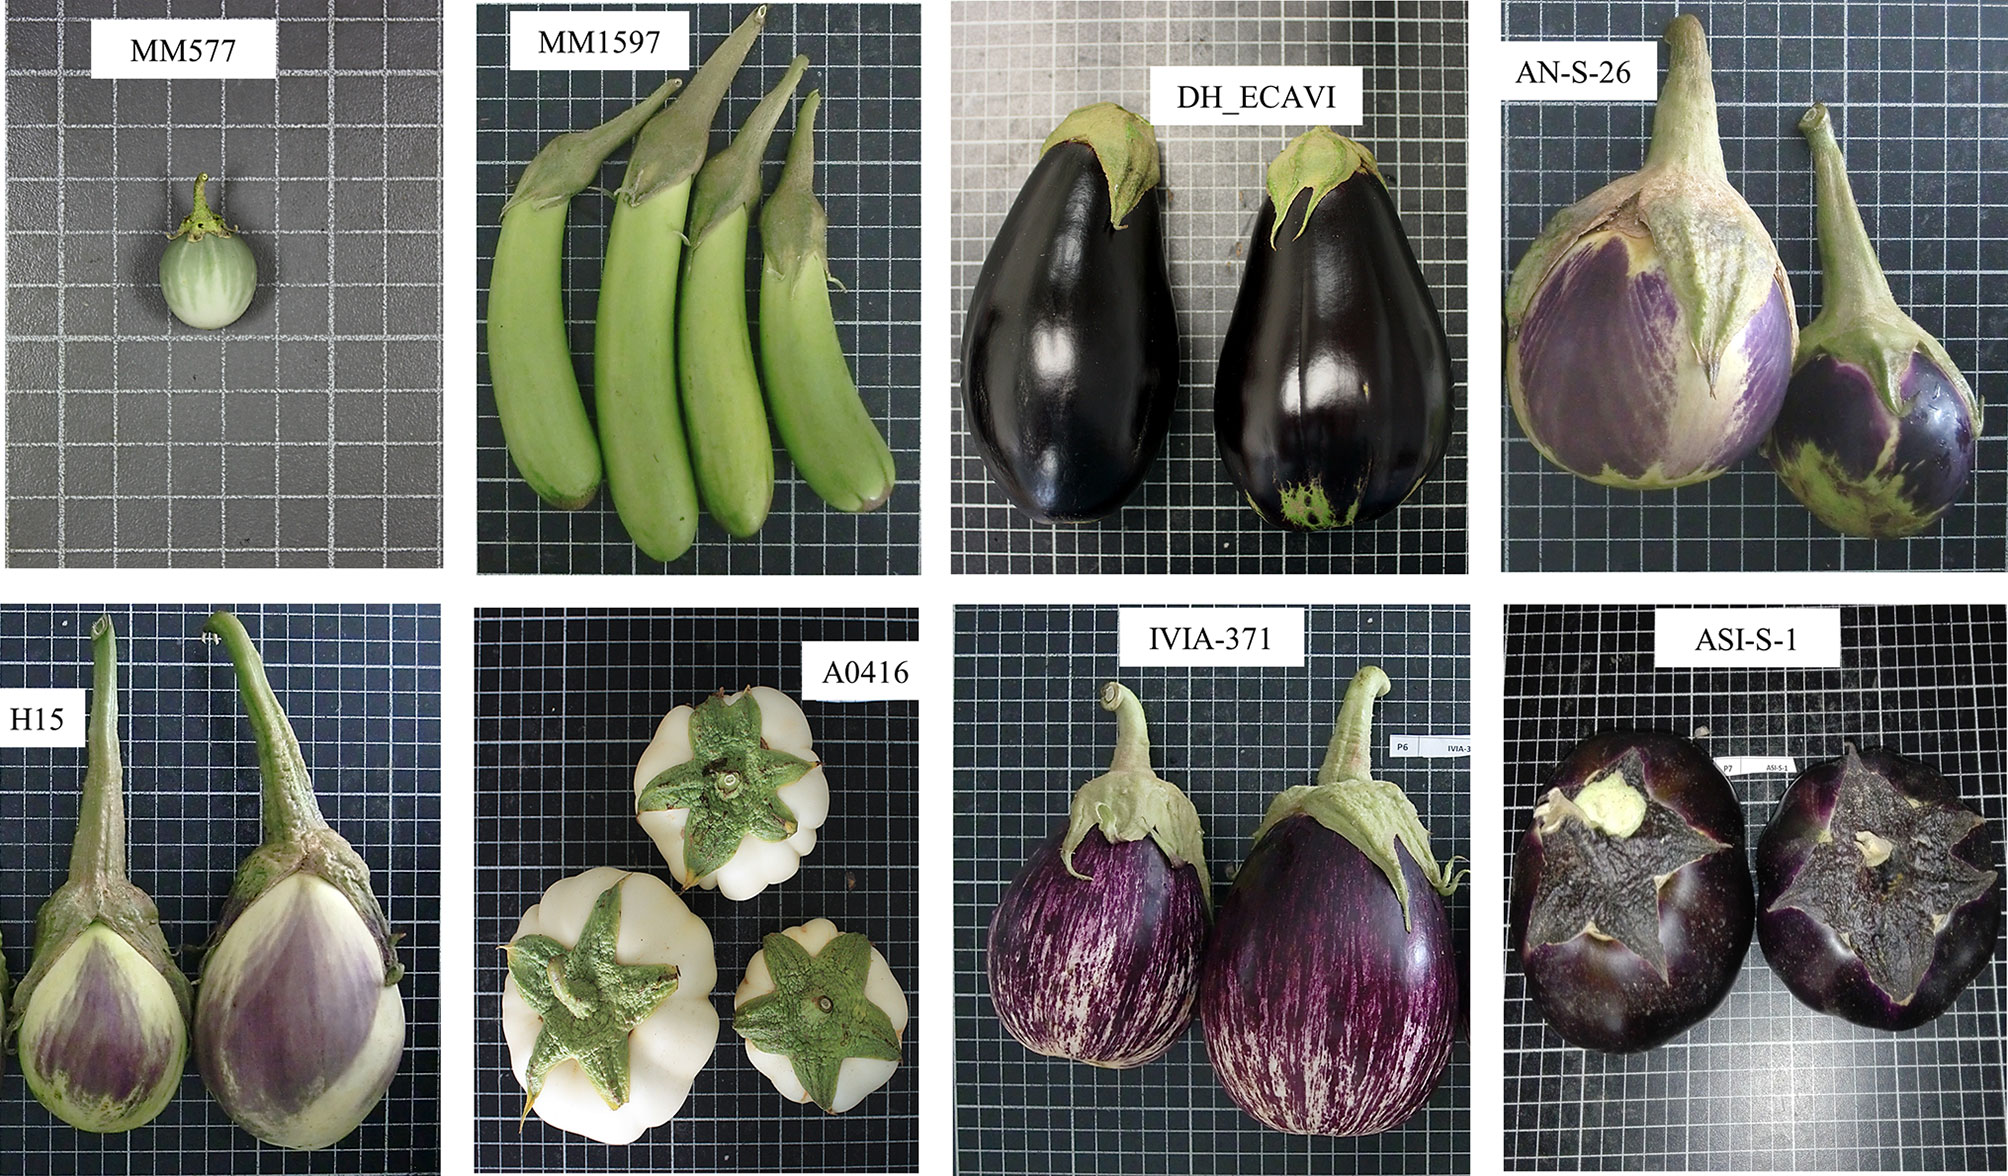 Frontiers Whole Genome Resequencing Of Seven Eggplant Solanum Melongena And One Wild Relative S Incanum Accessions Provides New Insights And Breeding Tools For Eggplant Enhancement Plant Science